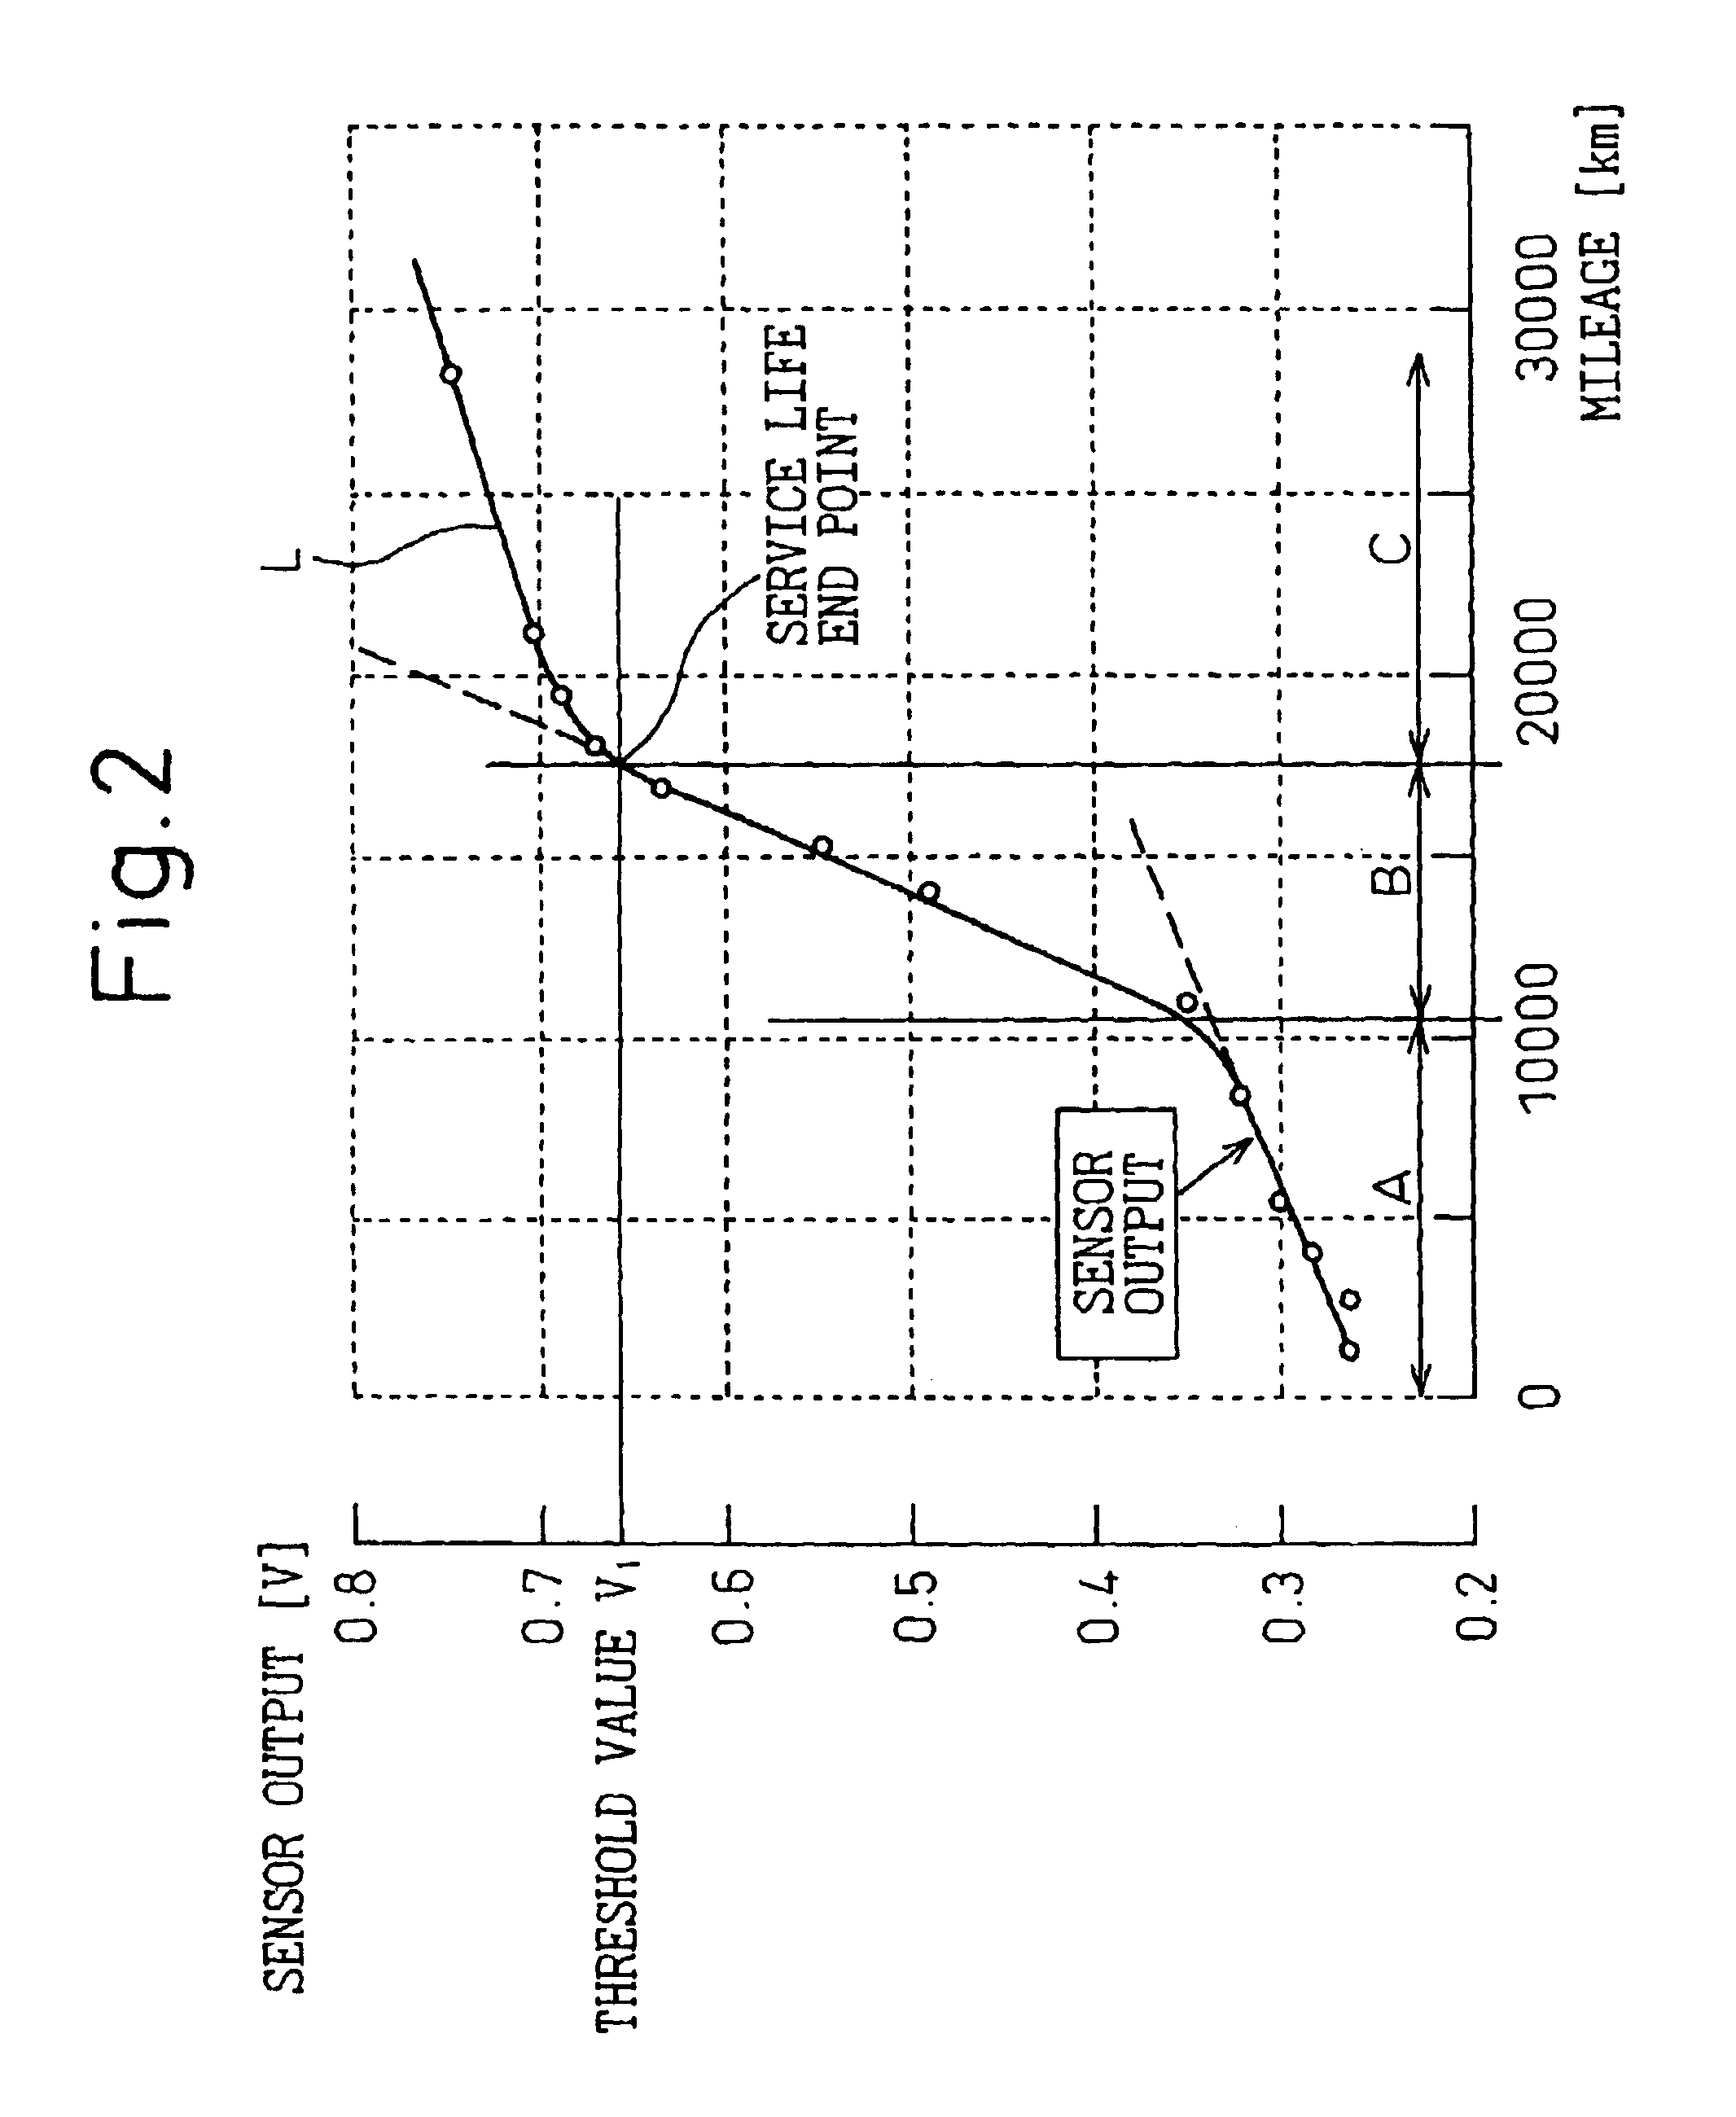 Device and method for detecting oil deterioration